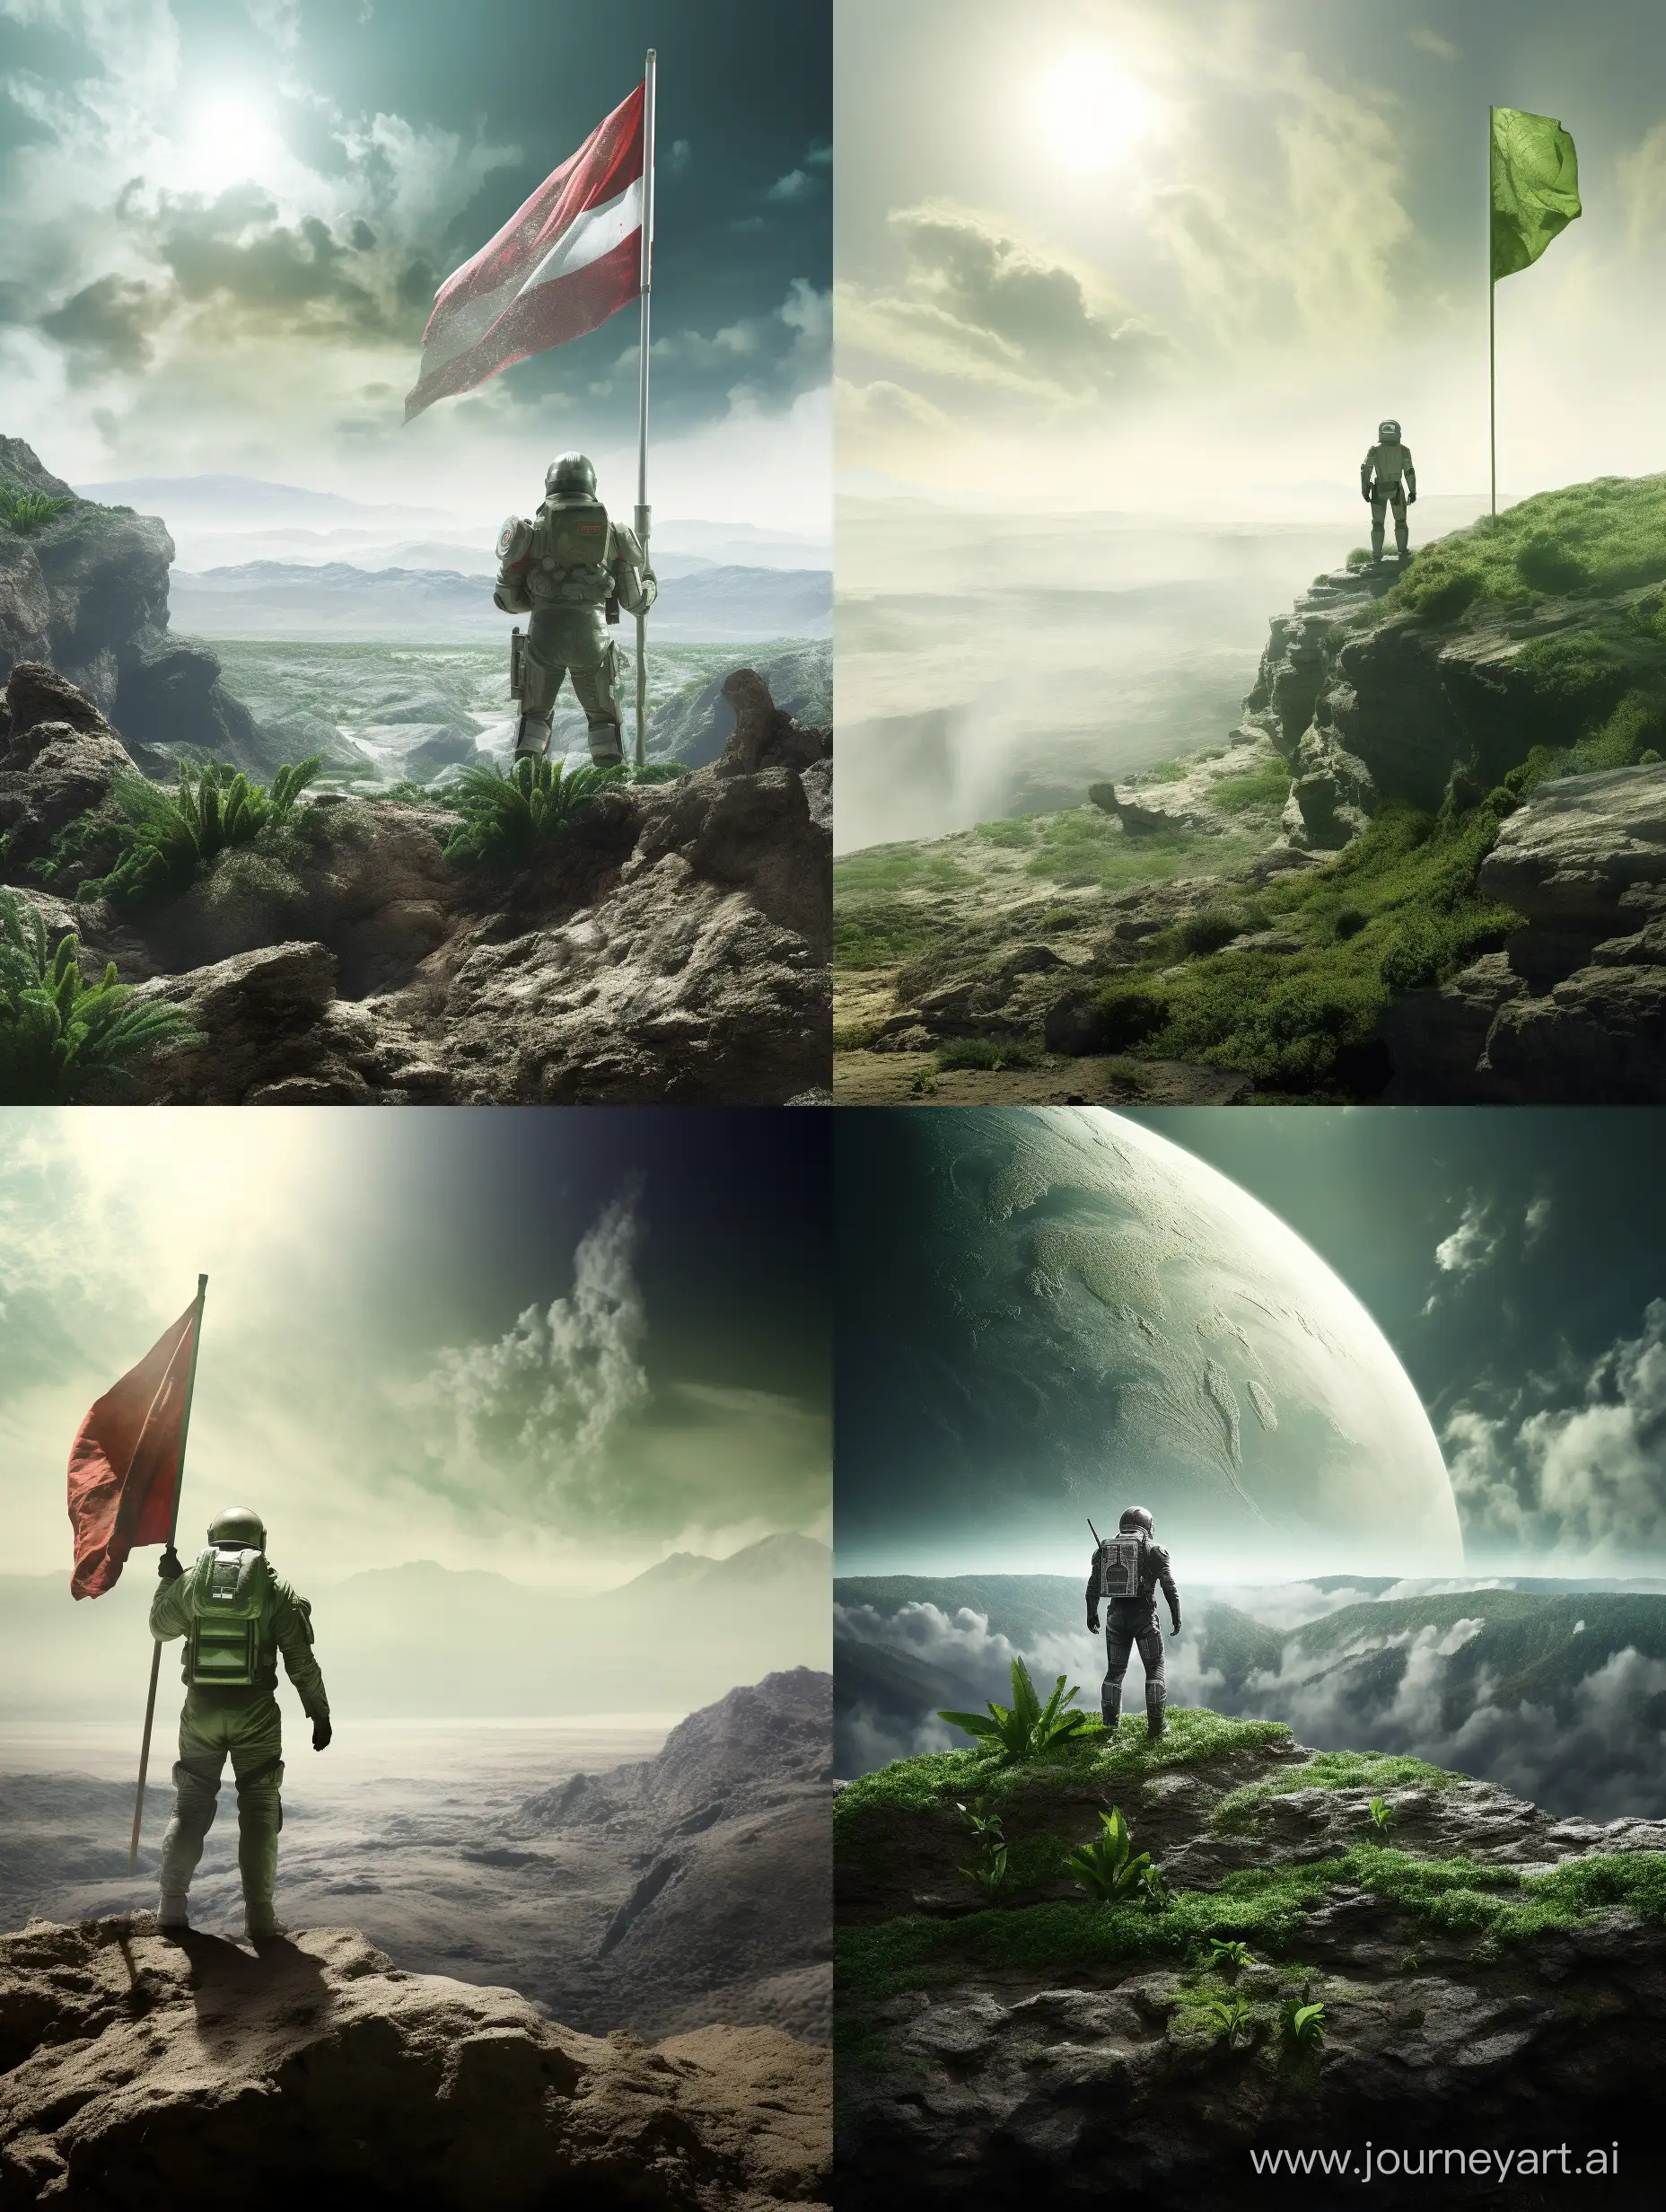 an astronaut in a rocky landscape holding a waving flag with a human palm print on it looking away at other plants in the near distance. the image with green tint and fog. this imagine represent a future scene. there are planets in the distance and the astronaut is standing far away from the camera.